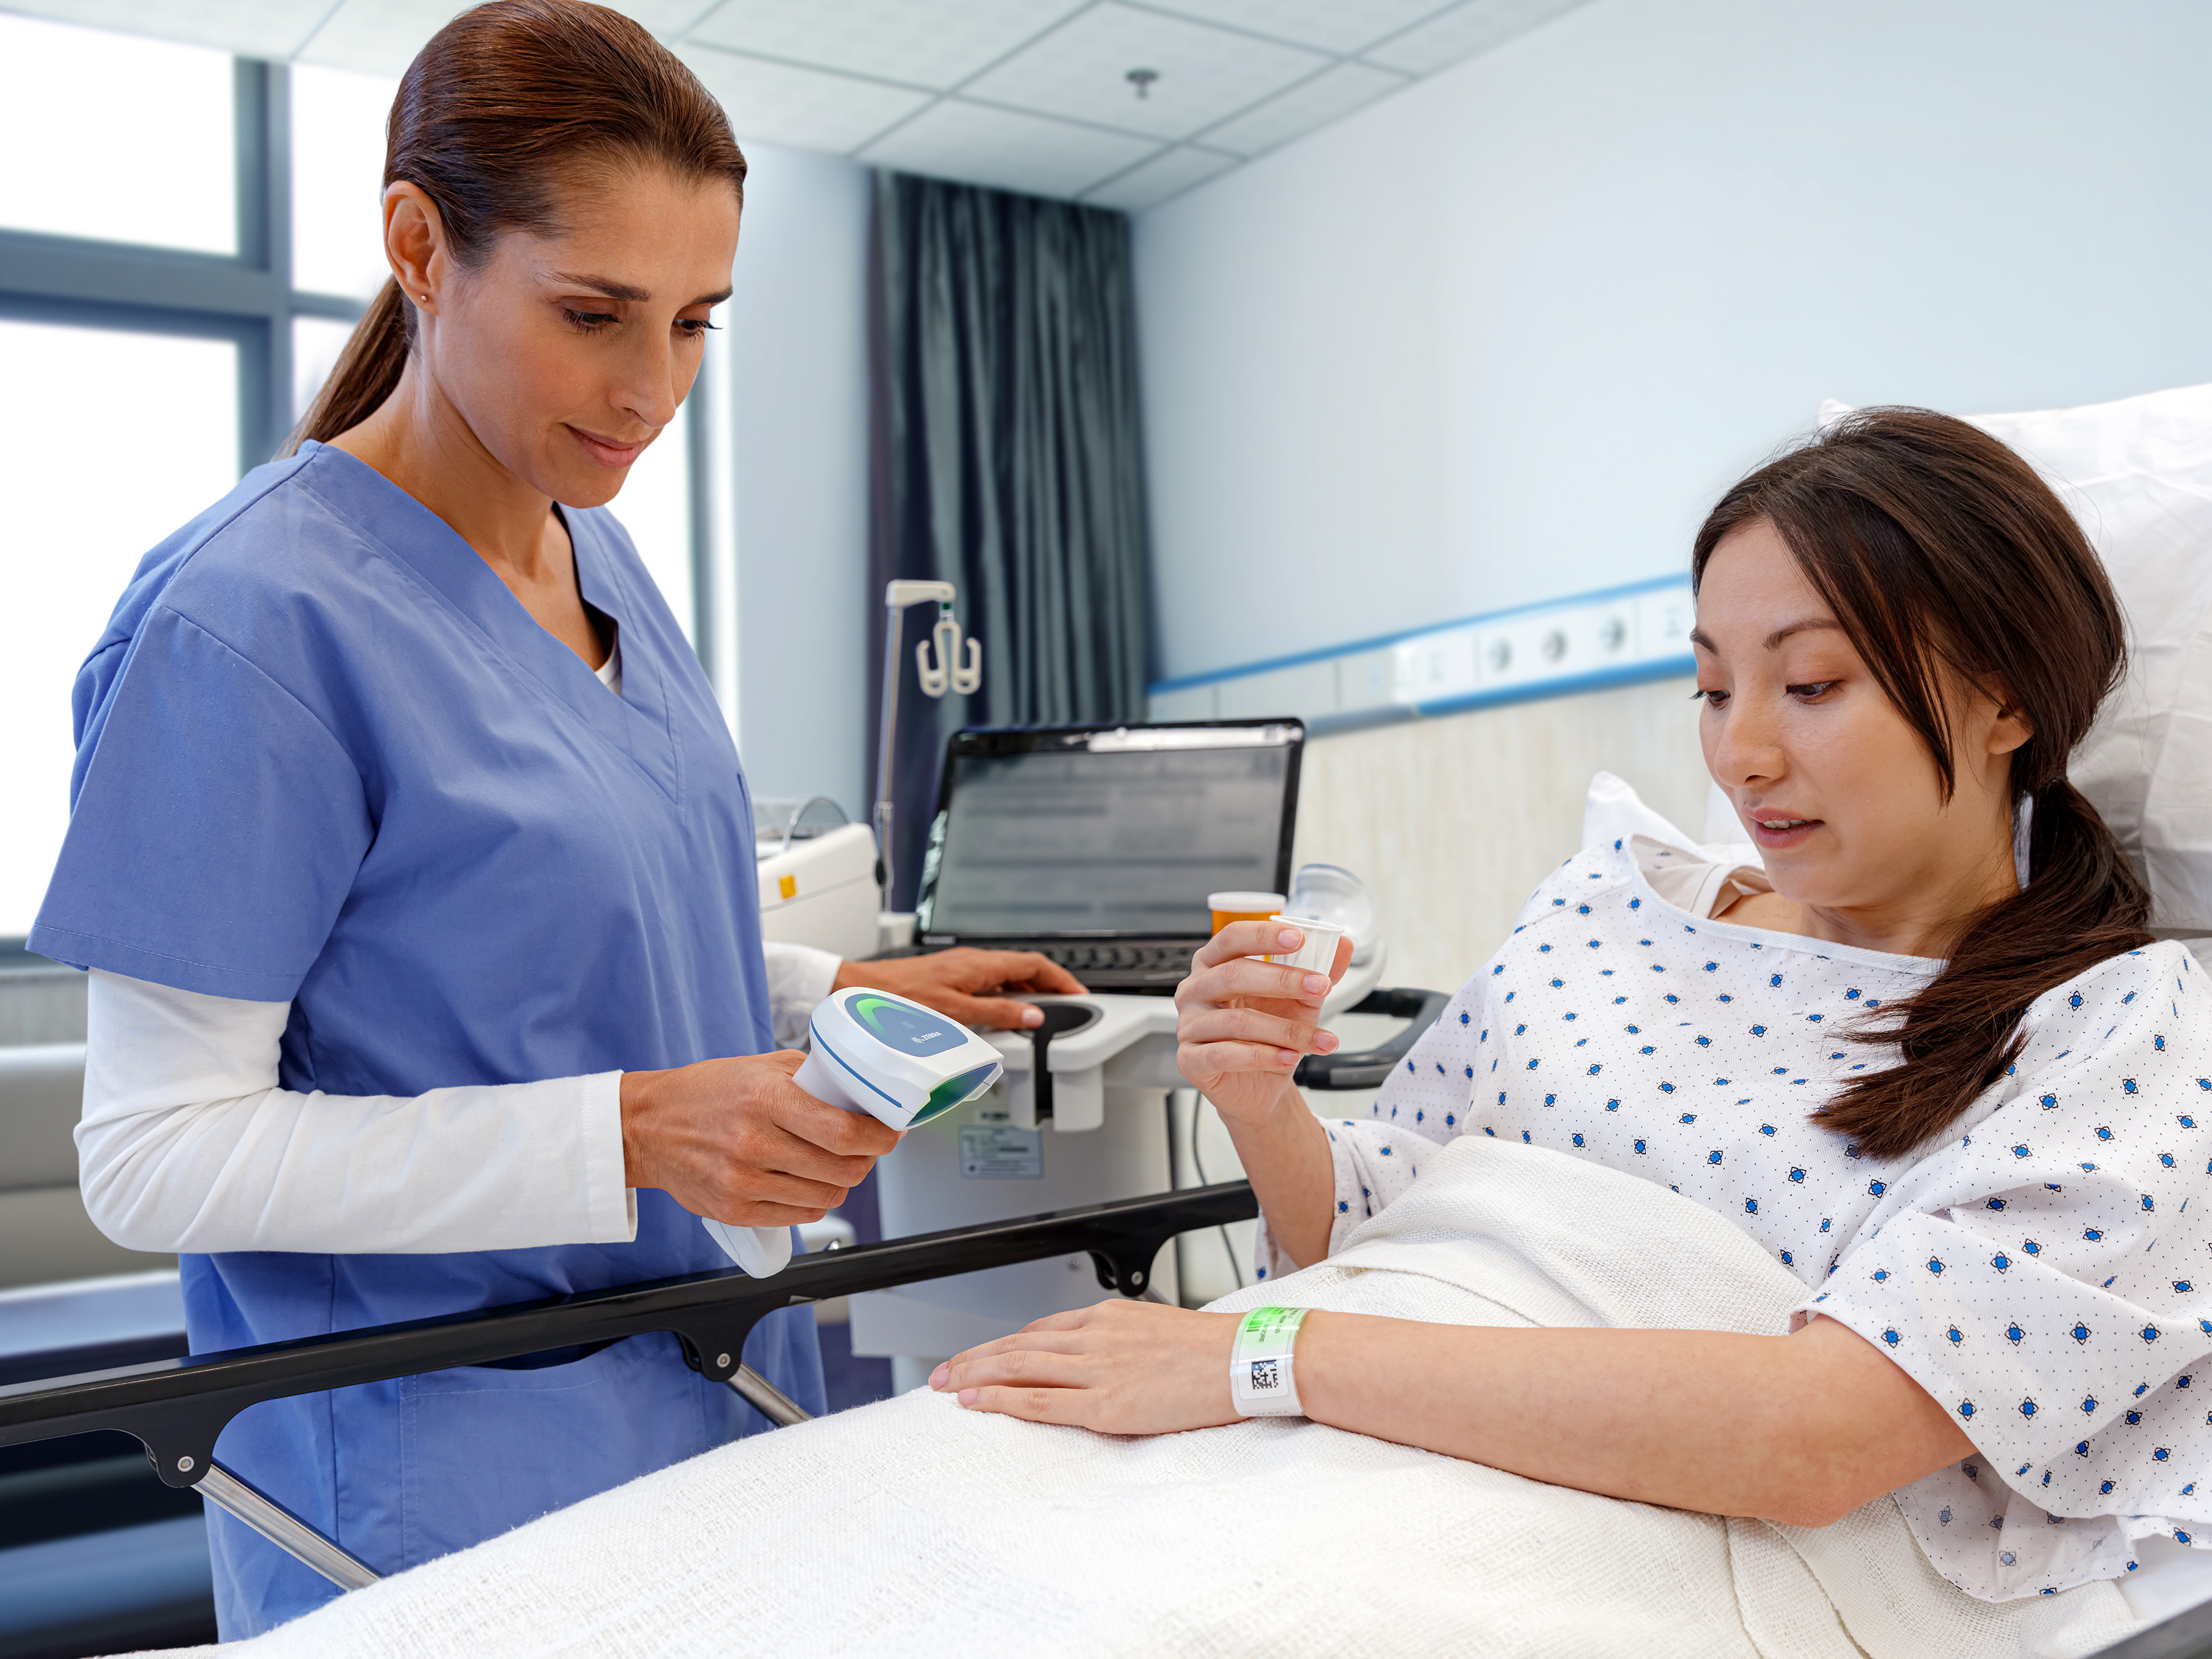 Healthcare Medication Administration at Bedside with wrist scan